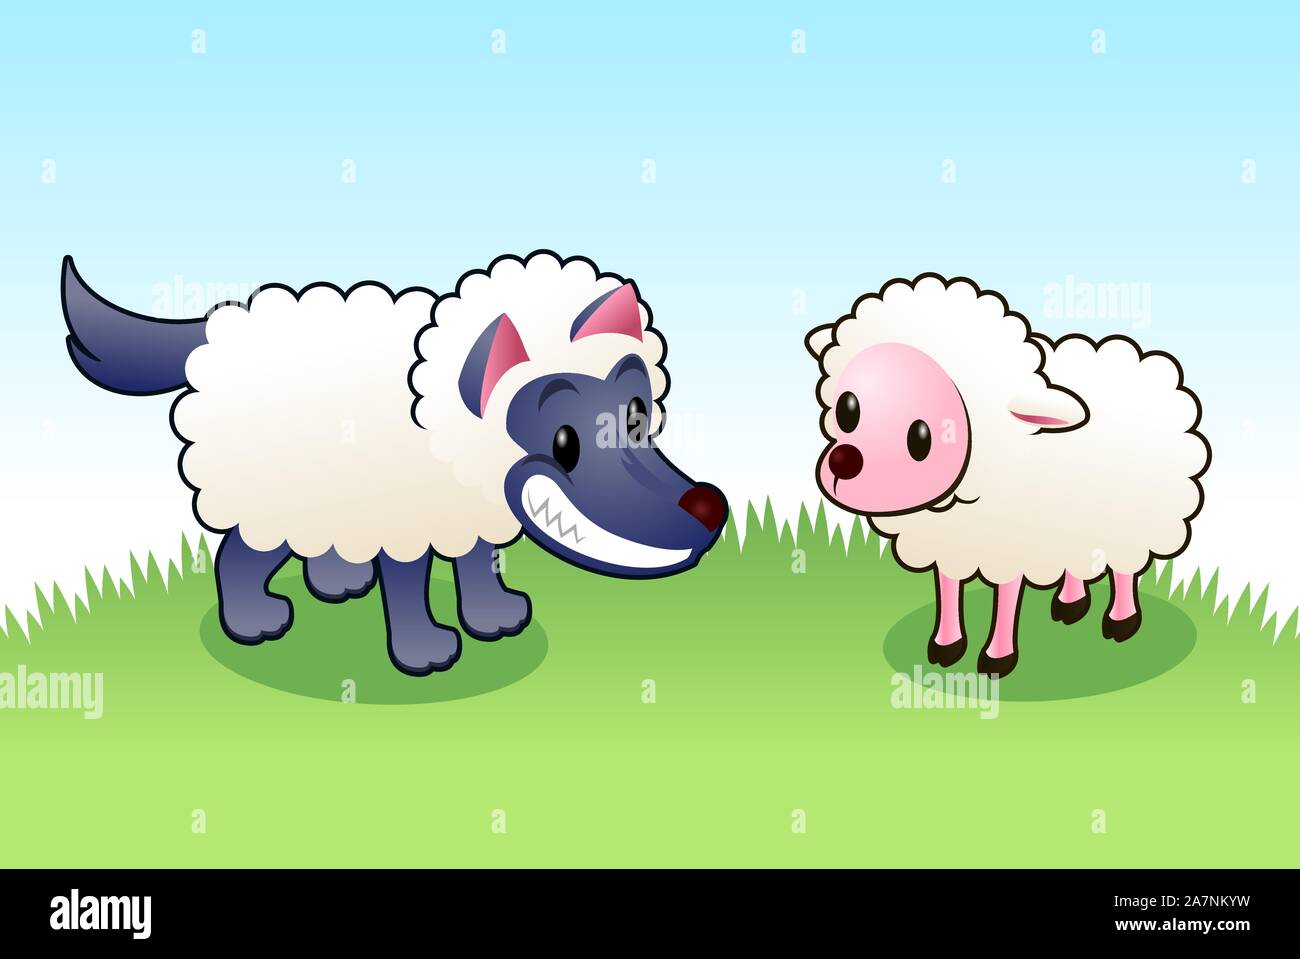 Wolf in sheep’s clothing smiling evilly of innocent sheep, with blue wolf and pink sheep, grass vector illustration. Stock Vector